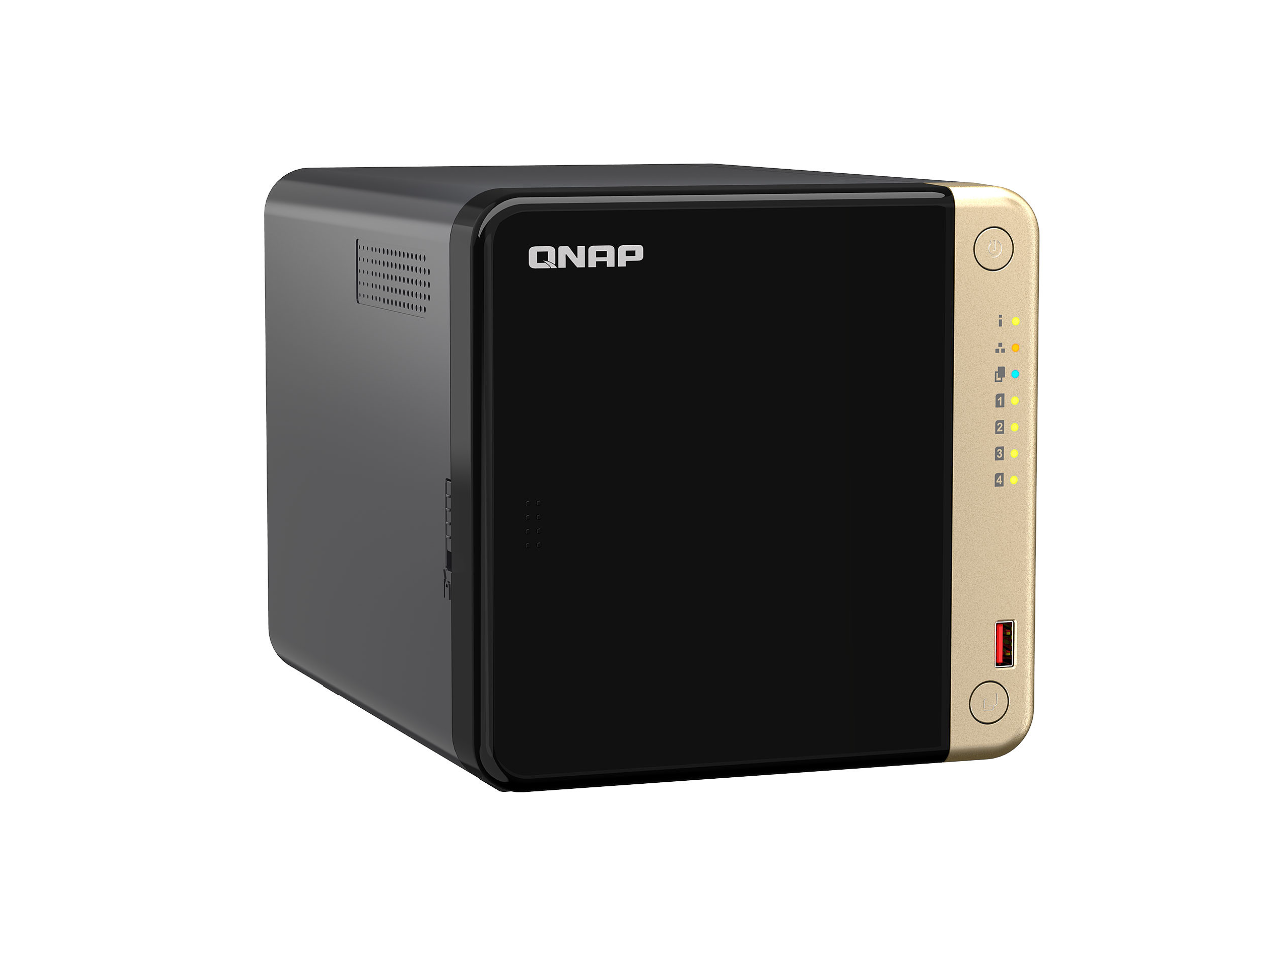 QNAP TS-464 4-Bay NAS with 16GB RAM, 500GB (2 x 250GB) NVME Cache, and 16TB (4 x 4TB) of Western Digital Red Plus Drives Fully Assembled and Tested